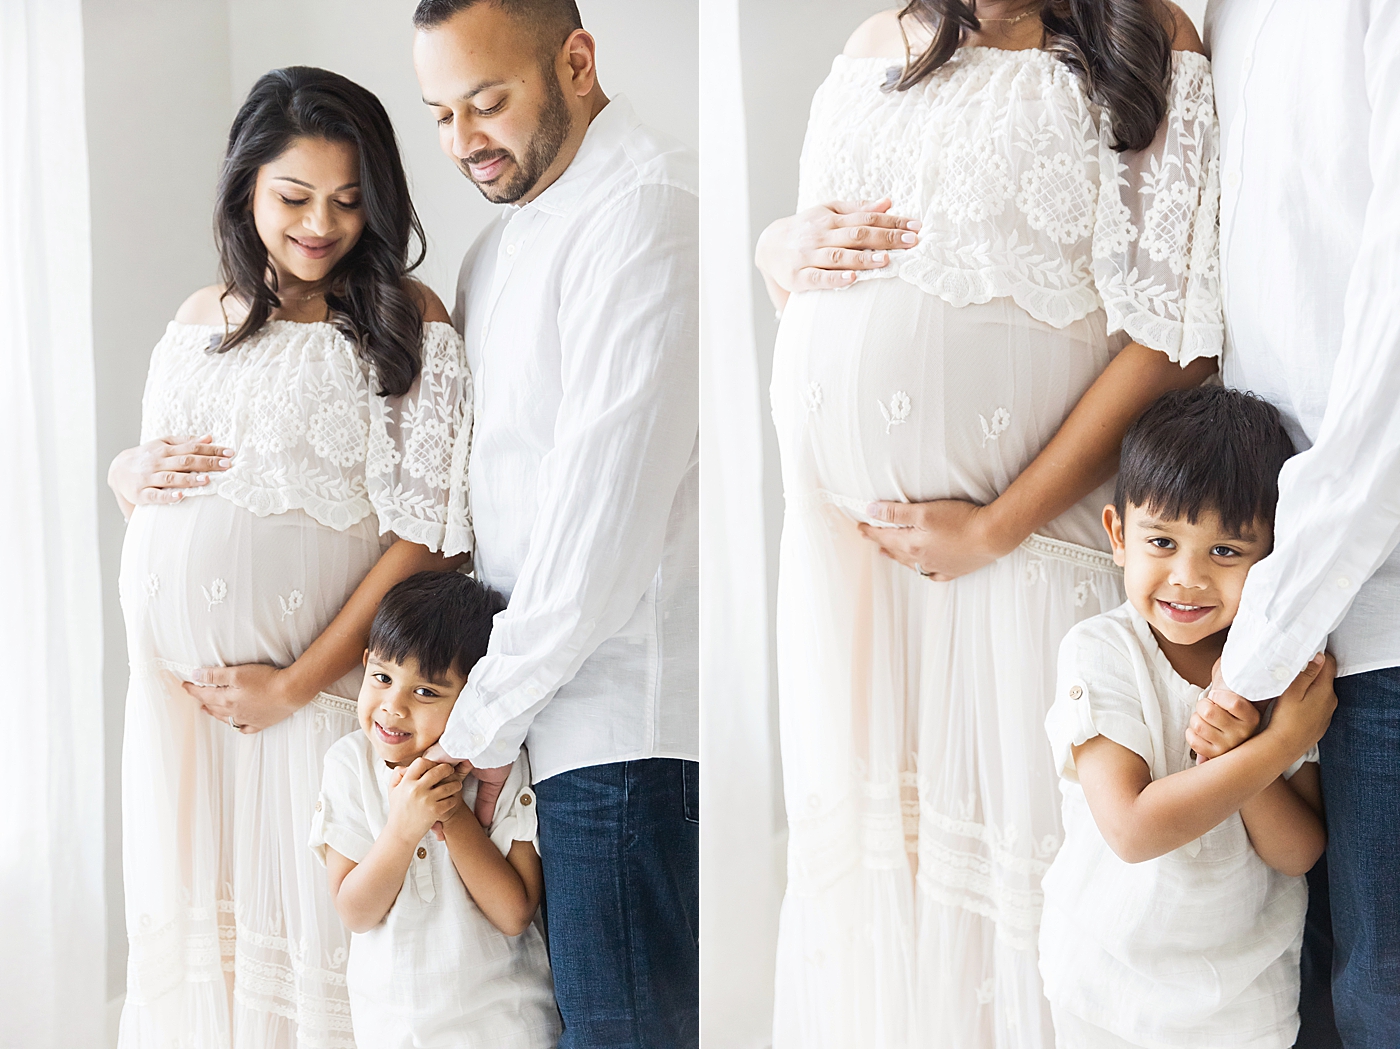 Family maternity session for twin babies. Photo by Fresh Light Photography.